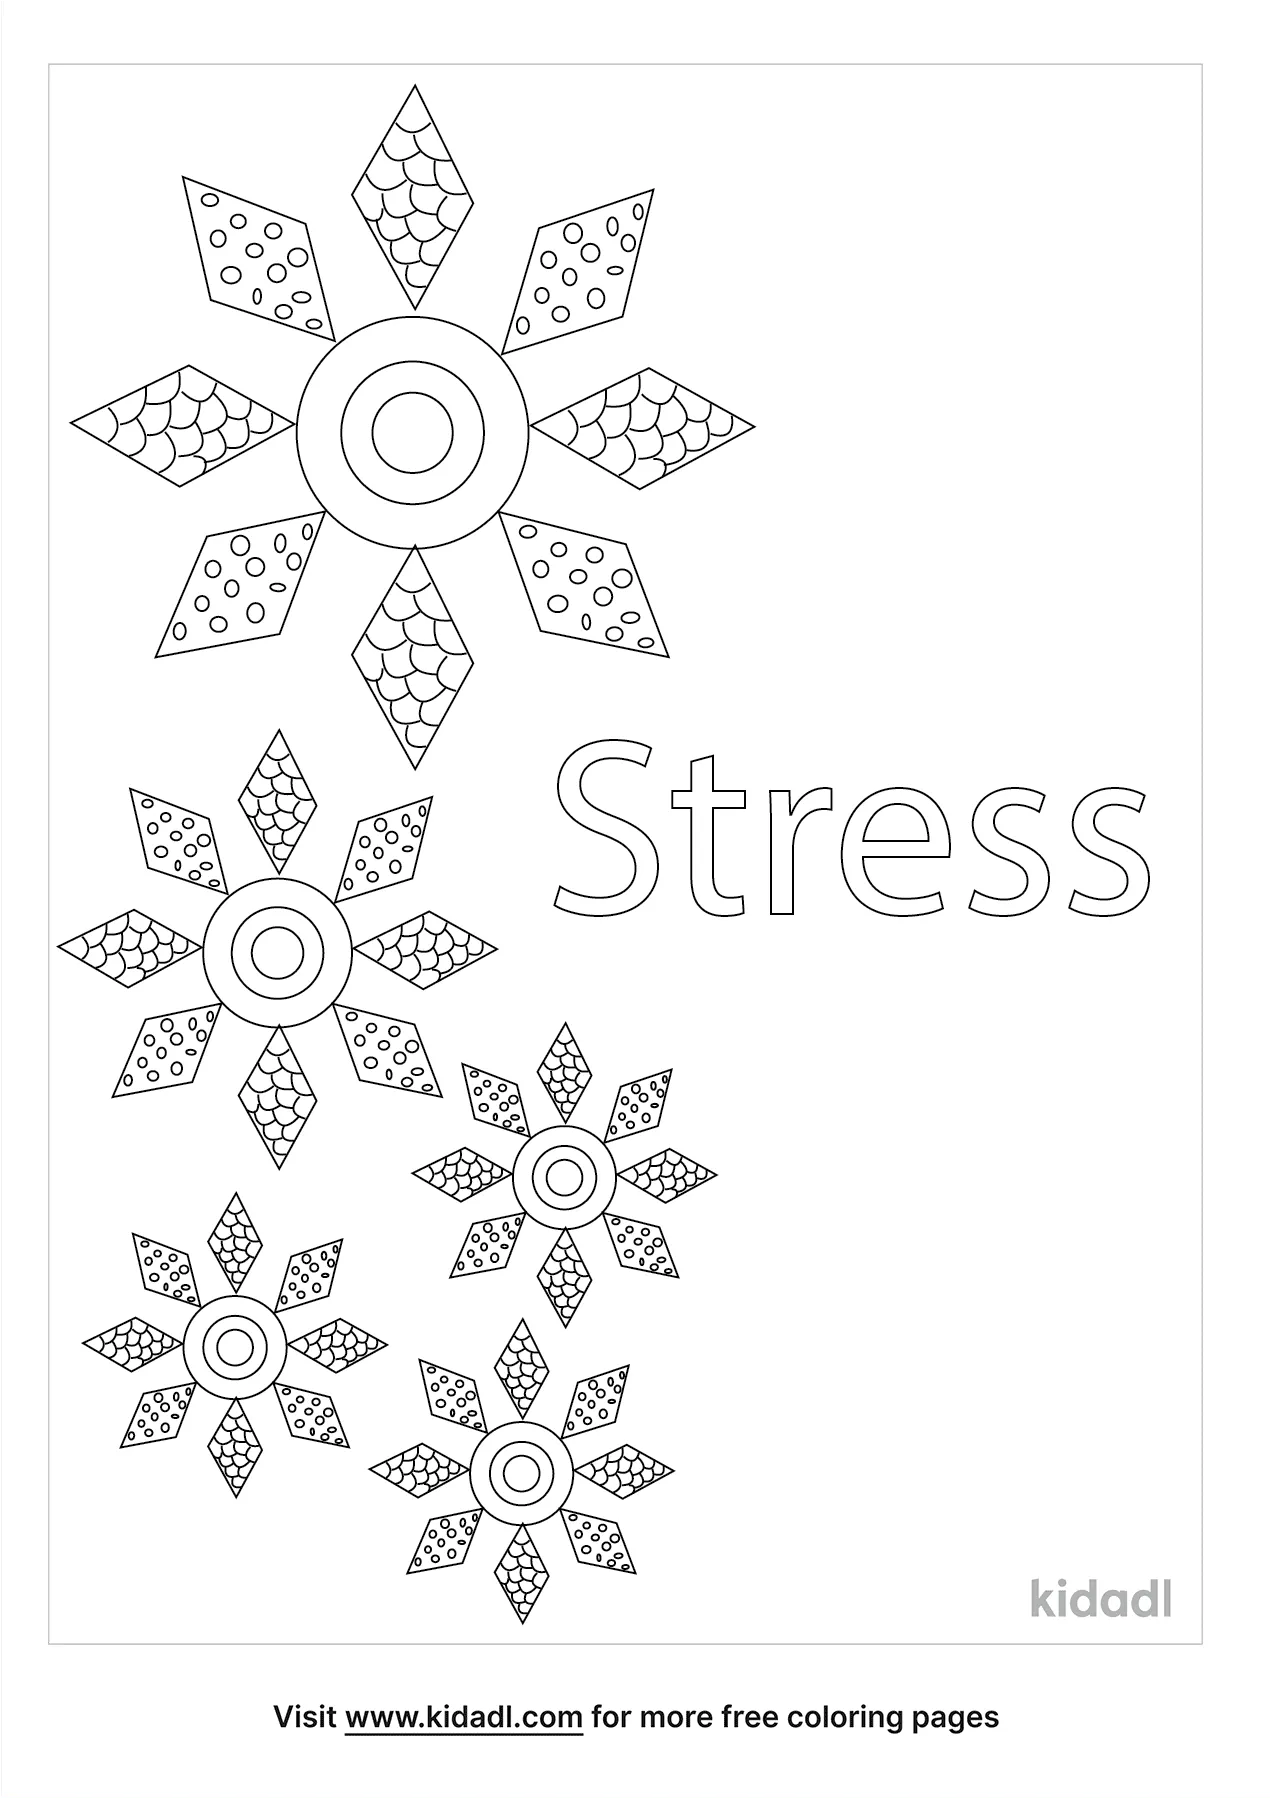 Stress Coloring Page